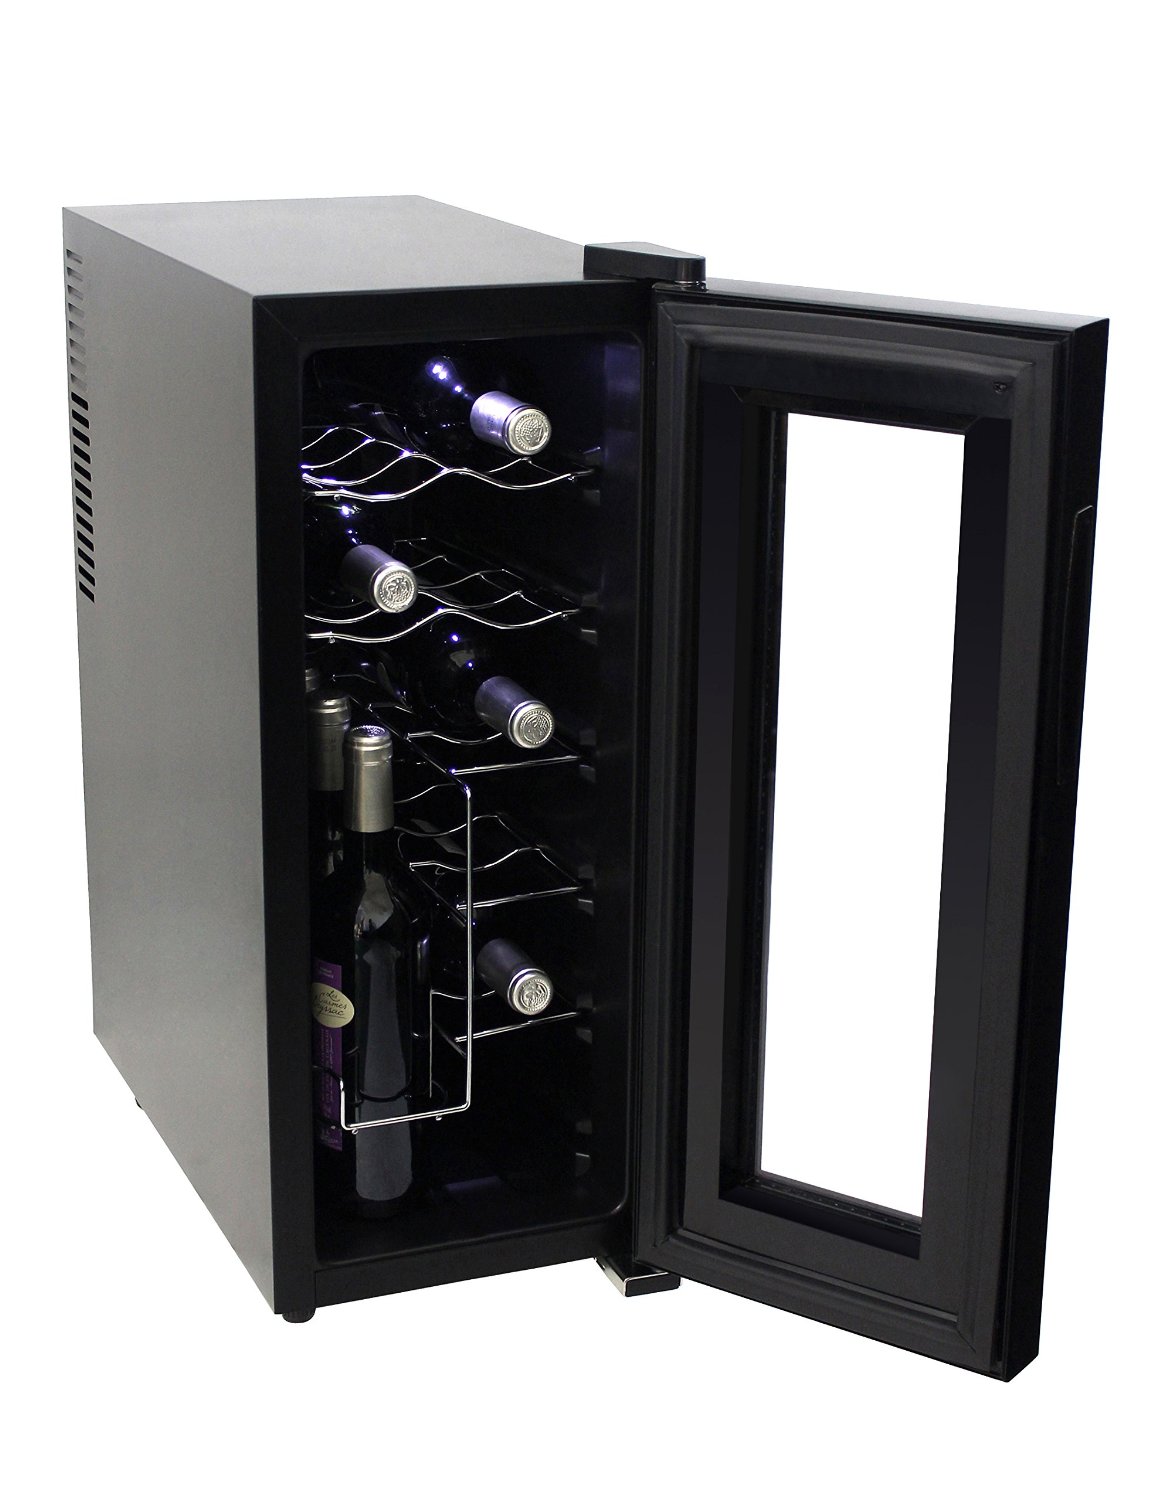 HOMEIMAGE HI-12C Thermo Electric Wine Cooler-12 Bottles